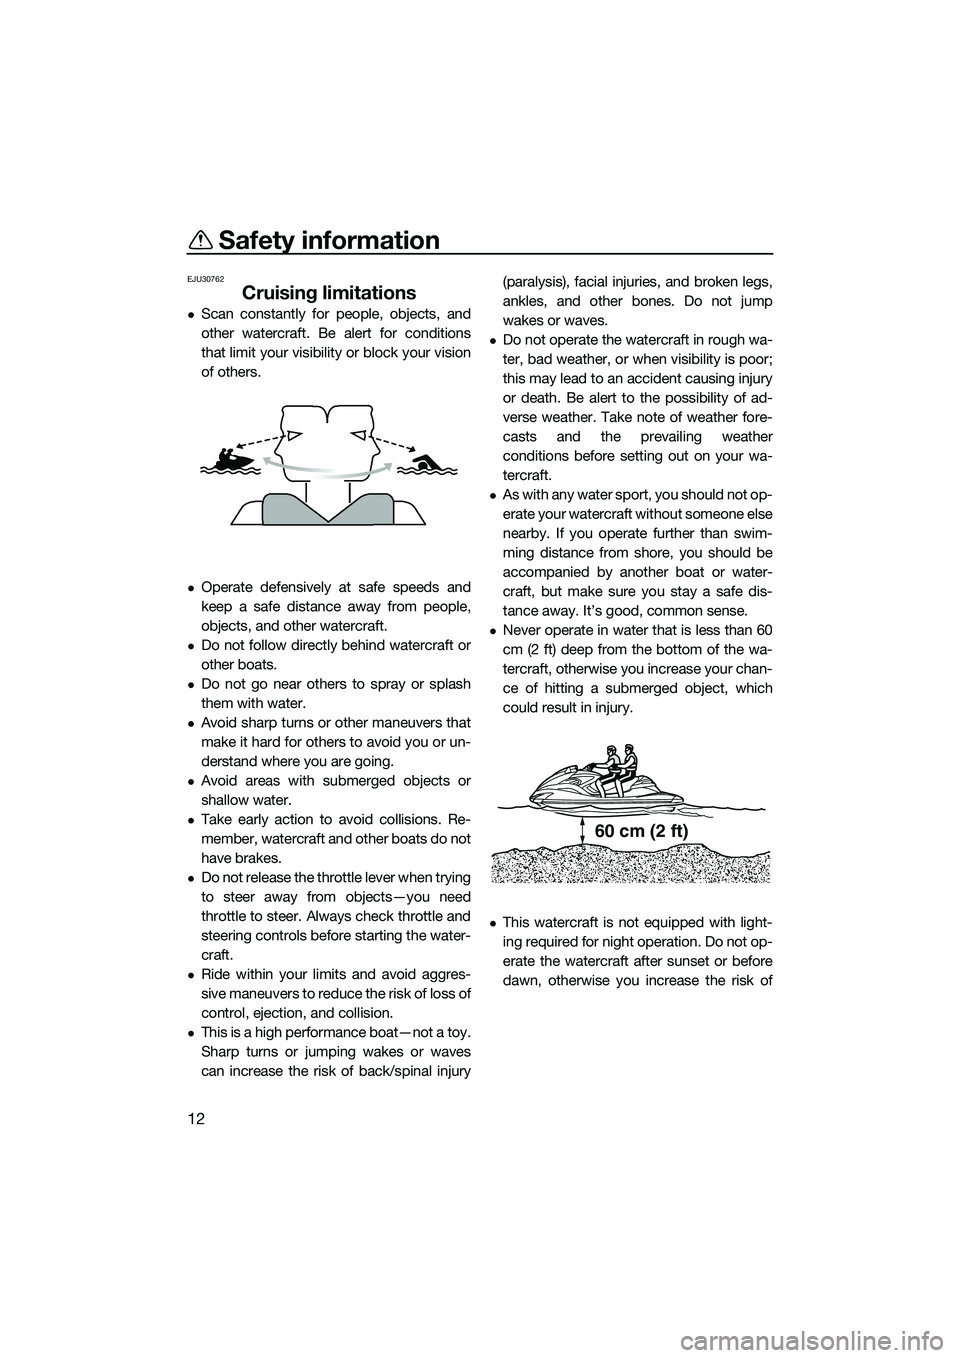 YAMAHA FZR SVHO 2015  Owners Manual Safety information
12
EJU30762
Cruising limitations
Scan constantly for people, objects, and
other watercraft. Be alert for conditions
that limit your visibility or block your vision
of others.
